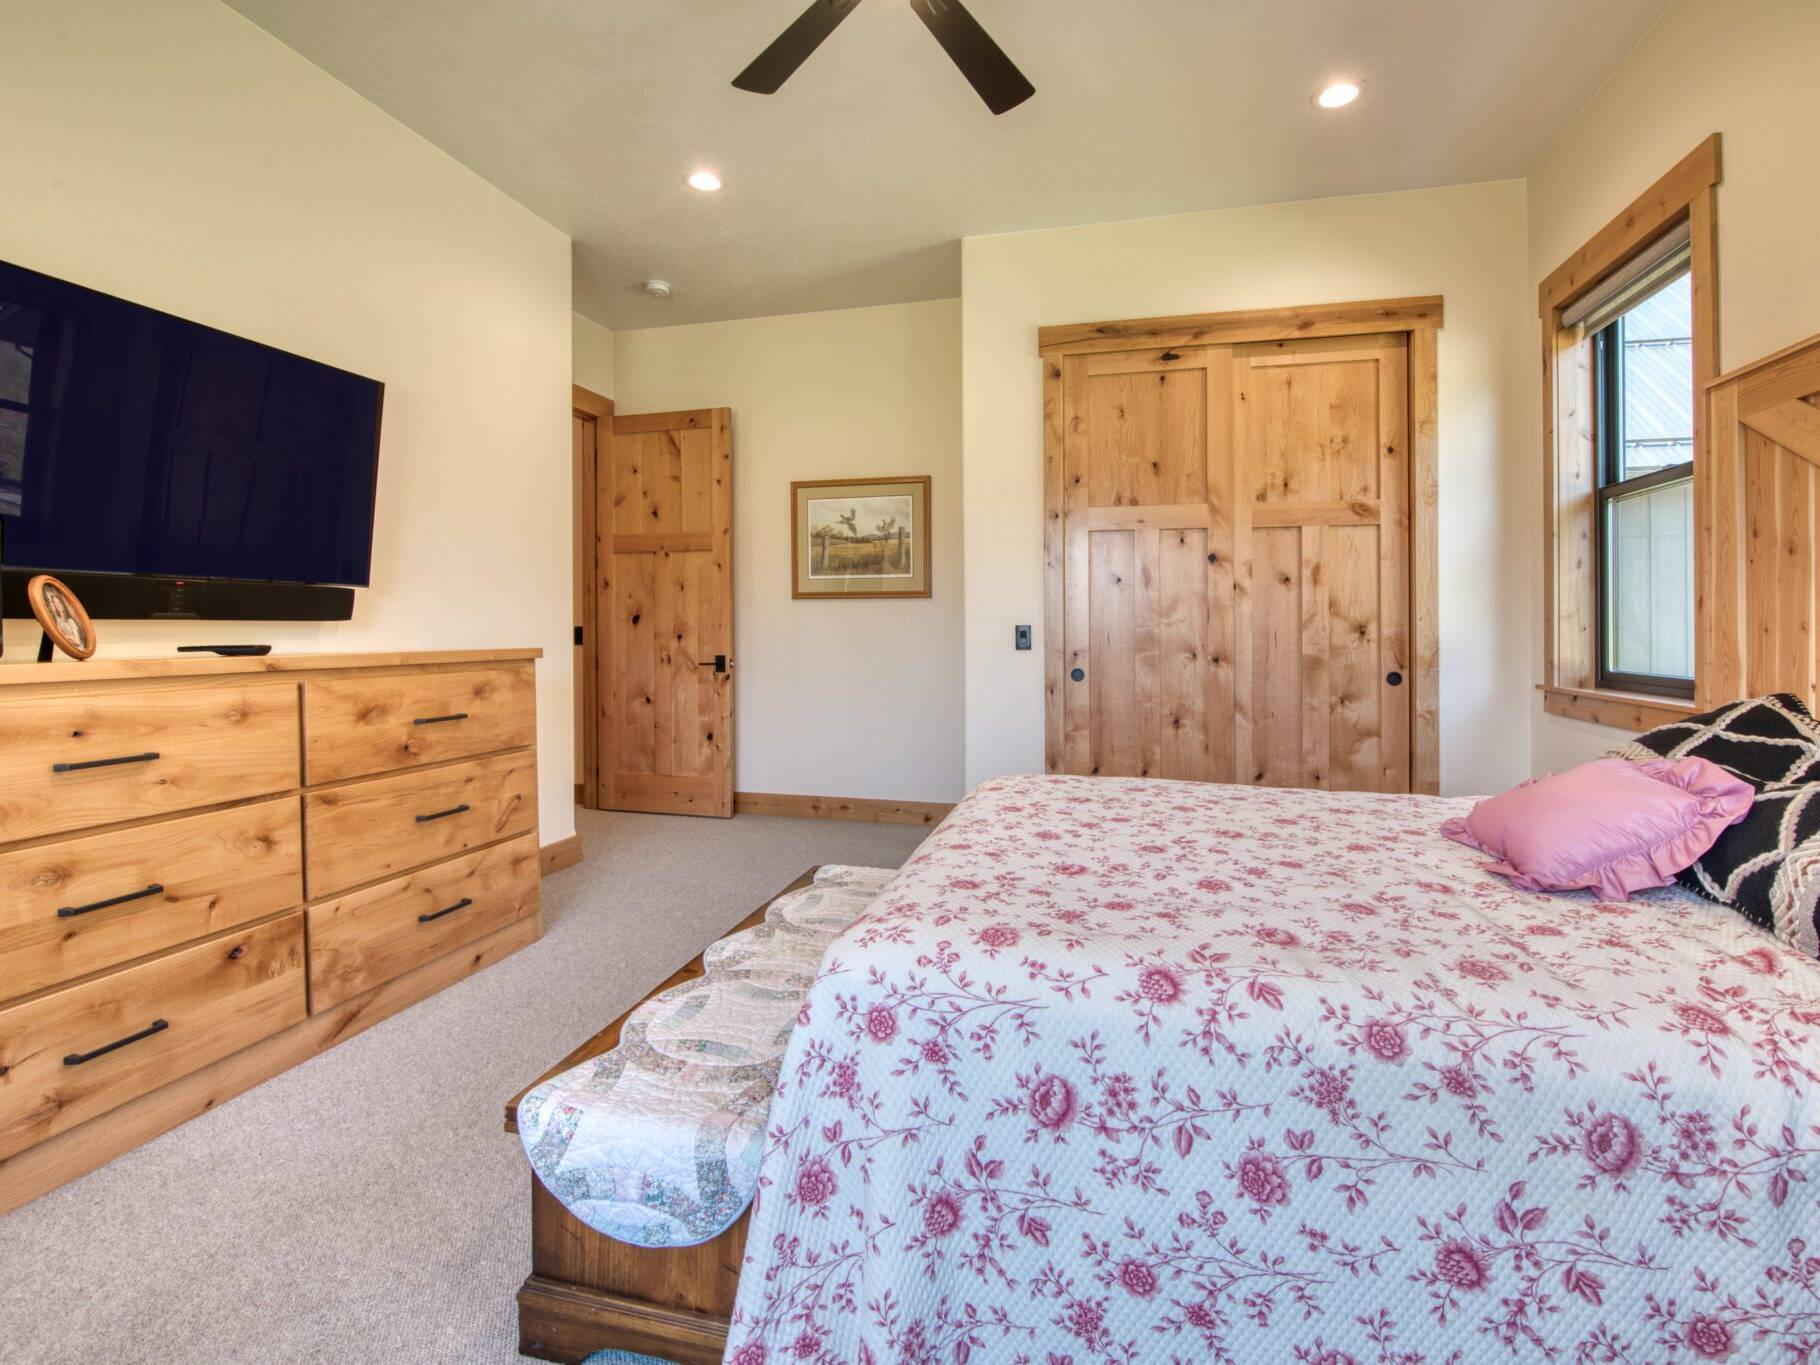 Bedroom with rustic alder trim and doors in a custom home built by Big Sky Builders of Montana in Florence, MT